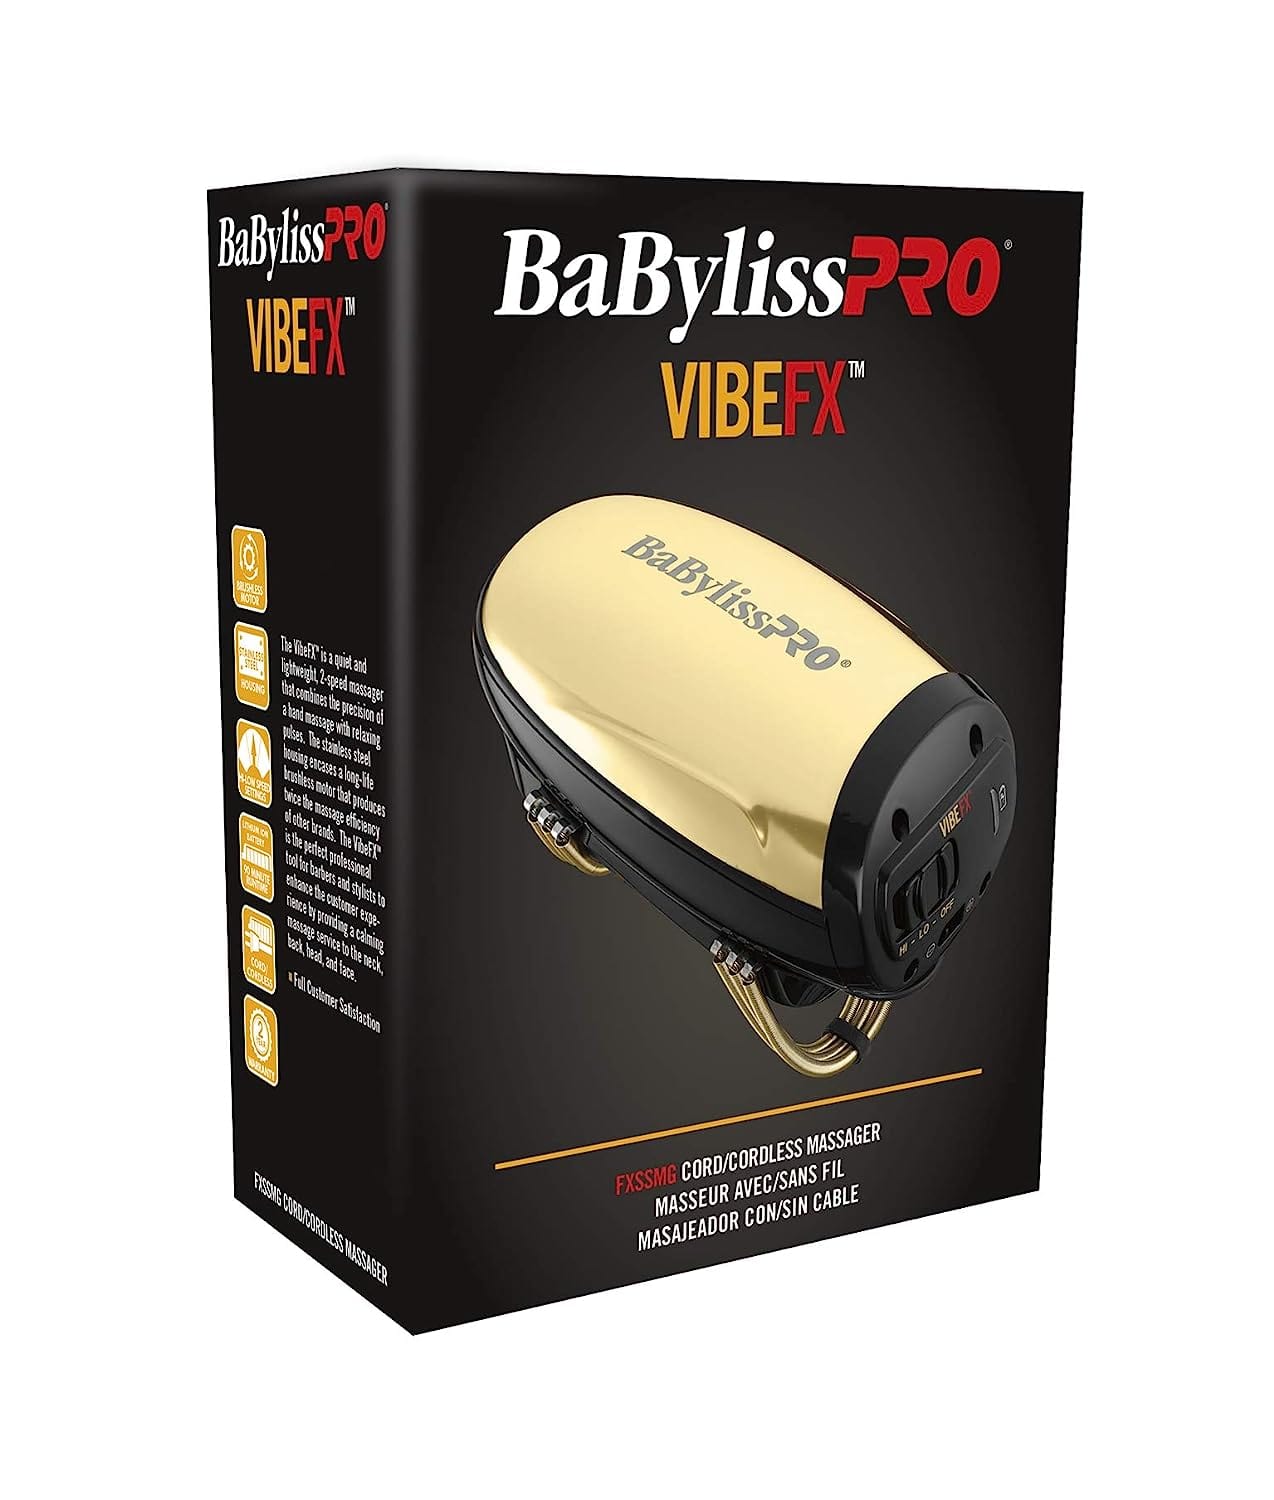 BABYLISS PRO_Vibe FX Cord/Cordless Massager_Cosmetic World